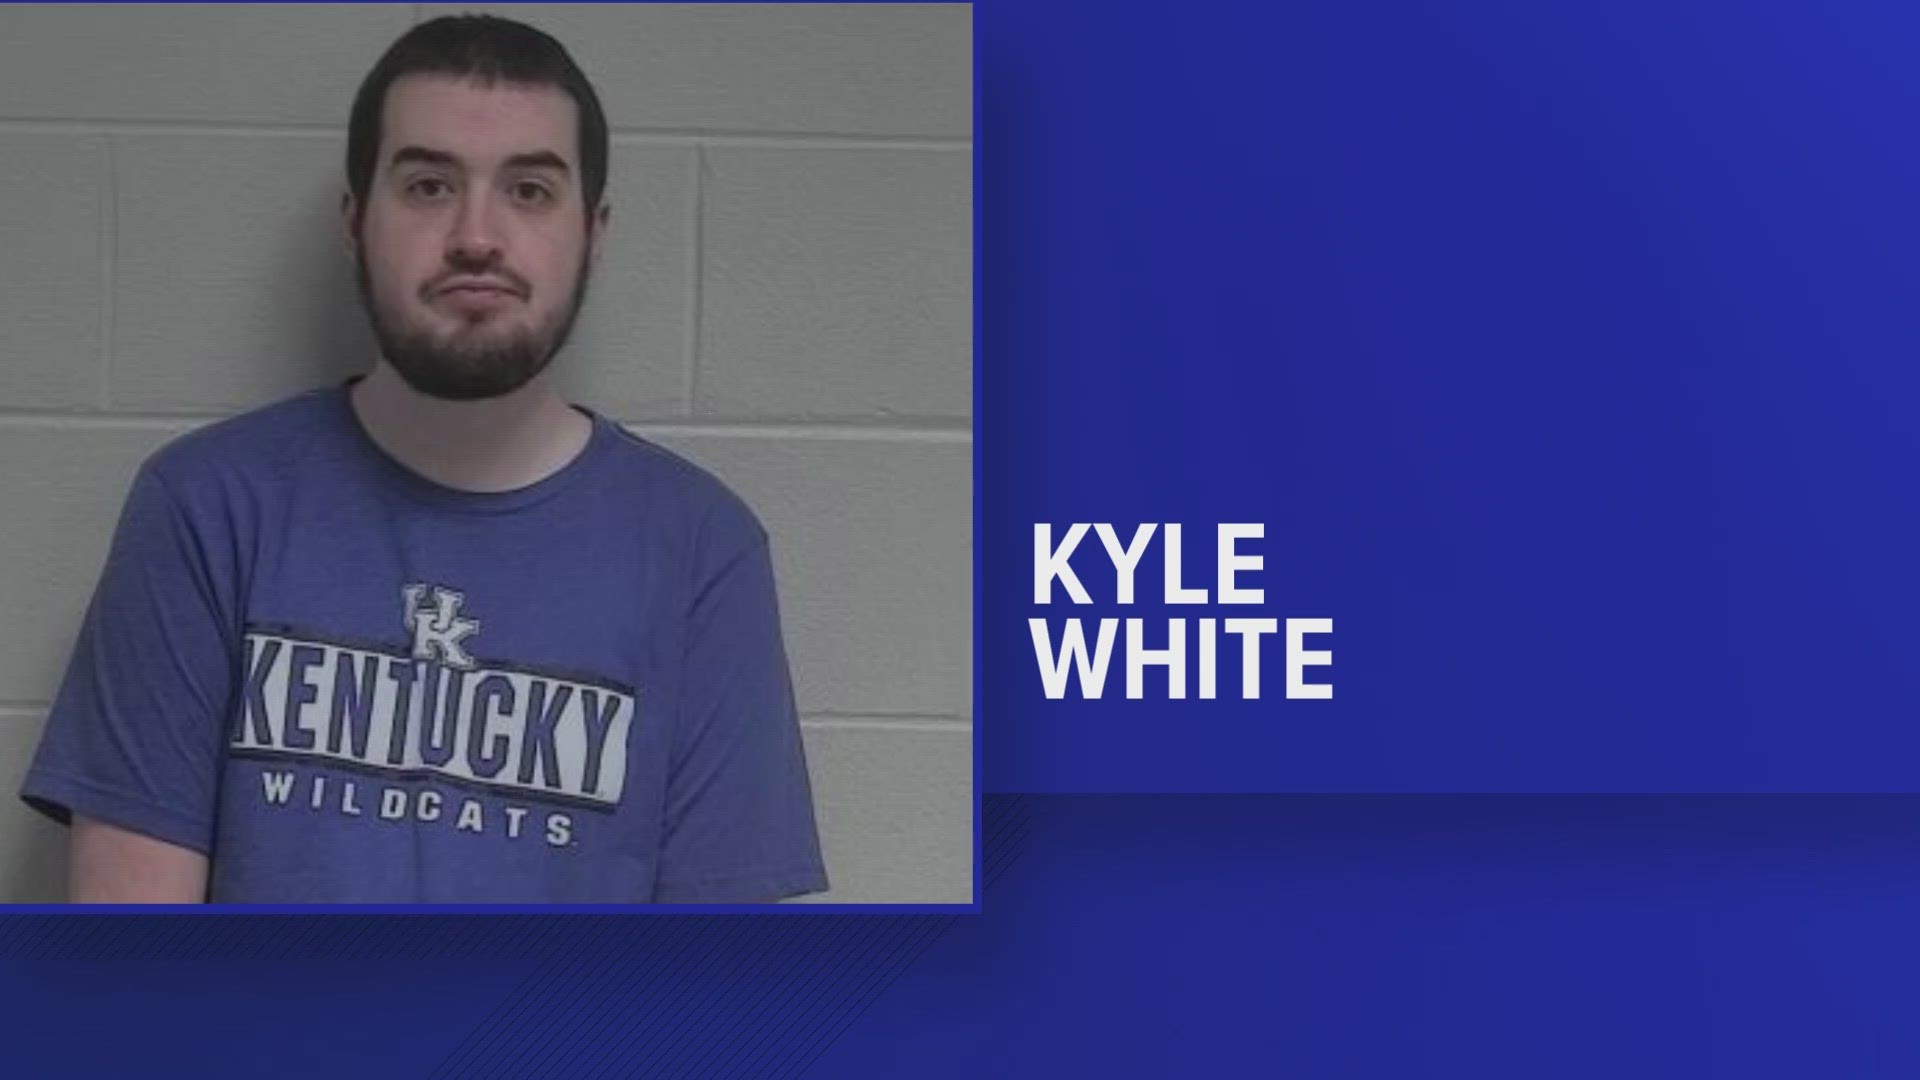 Authorities said 24-year-old Kyle White was selling access to child pornography and illegally obtained adult pornography to more than 10,000 people on the internet.